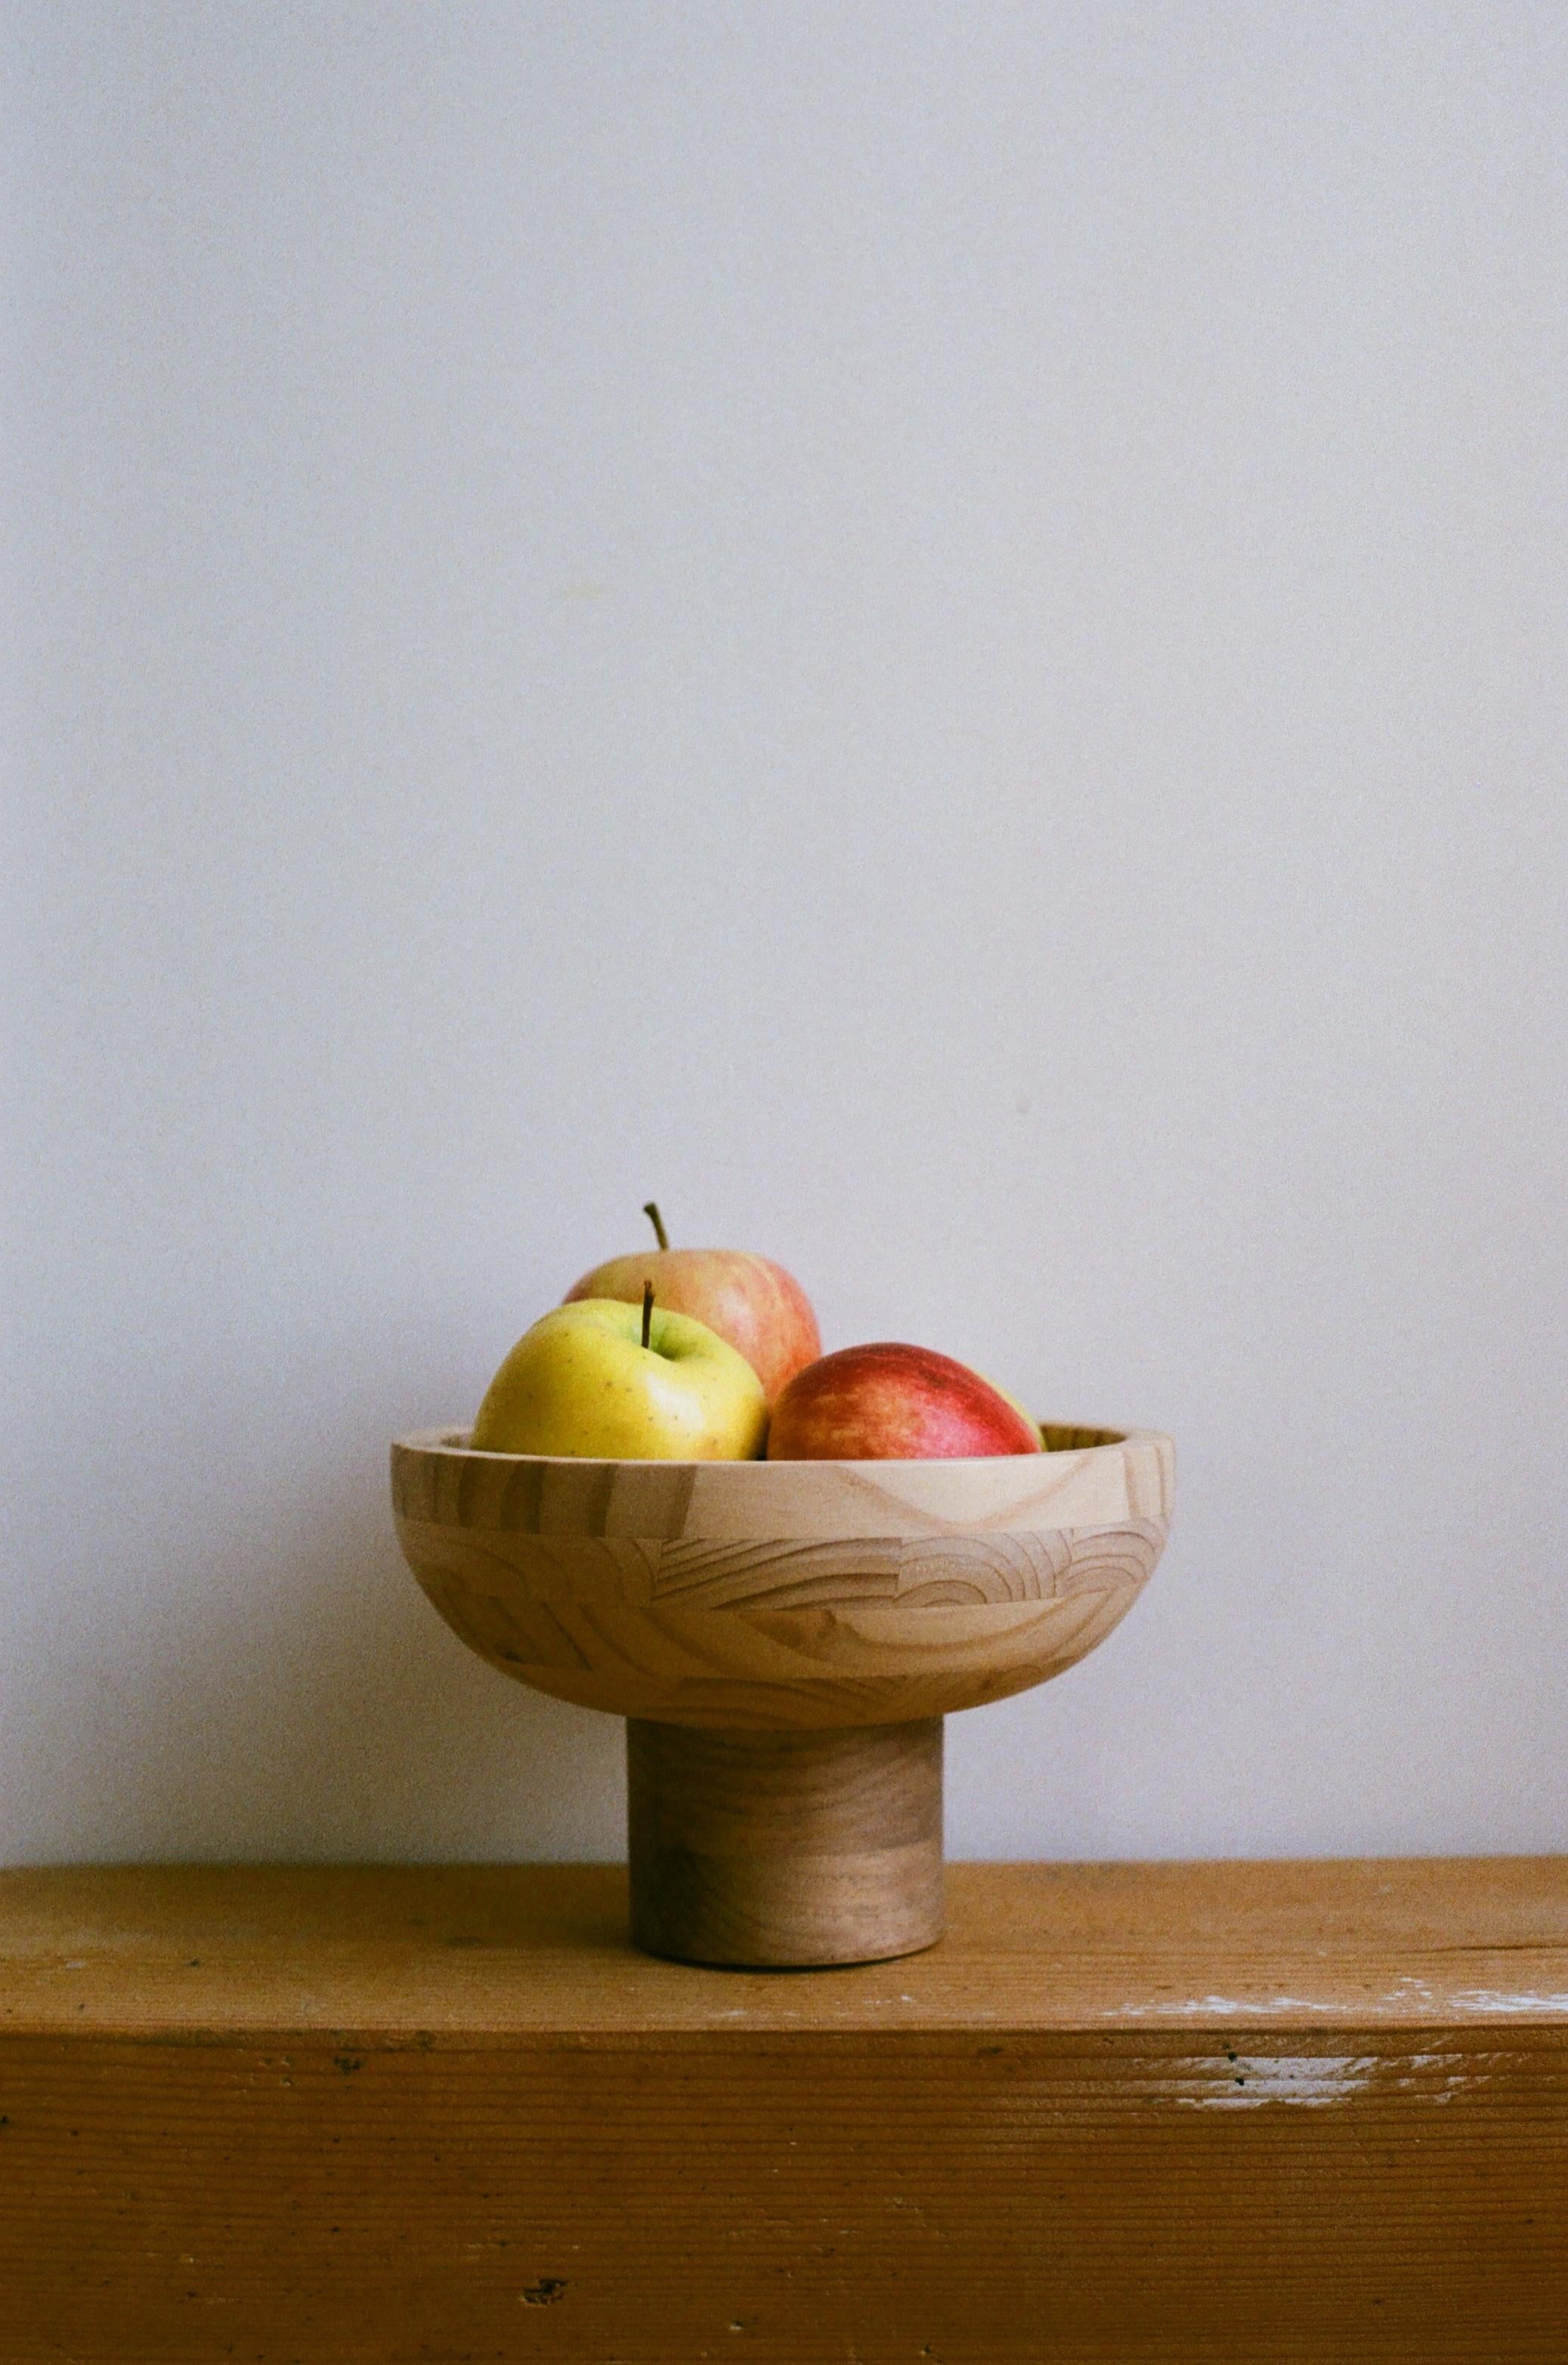 The traditional fruit bowl, reinterpreted thanks to its wide base and the alternation of essences.
Limited edition.
Photo credit 1 Charlene Lambert.

Wood species: Oak, Pine
Dimensions: 20.5 x 20.5 x 13cm
Technique: Collage and shoot
Finish :